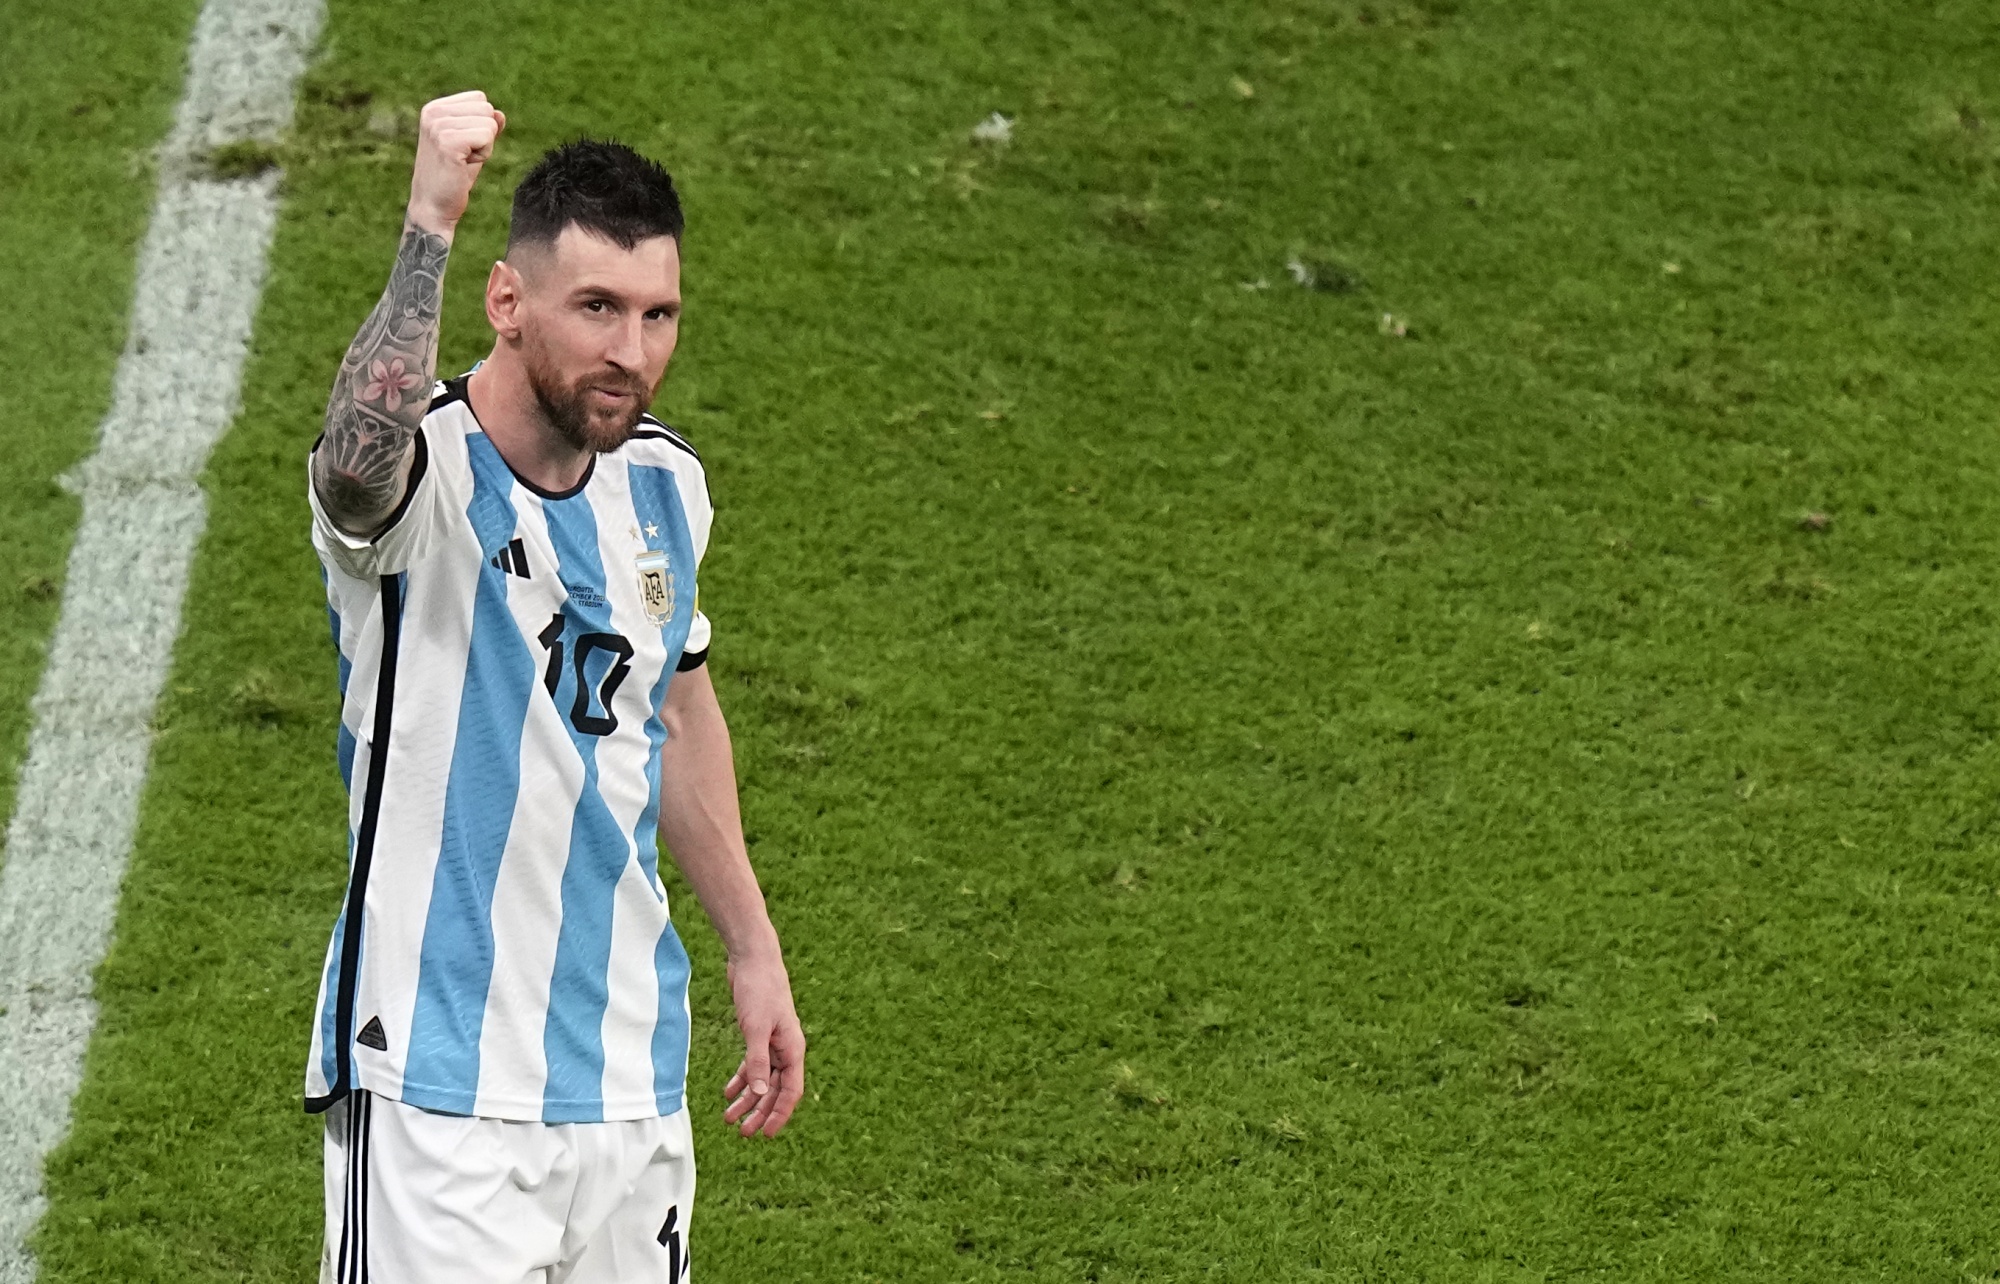 World Cup 2022: What It's Like to Watch Lionel Messi Play For Argentina